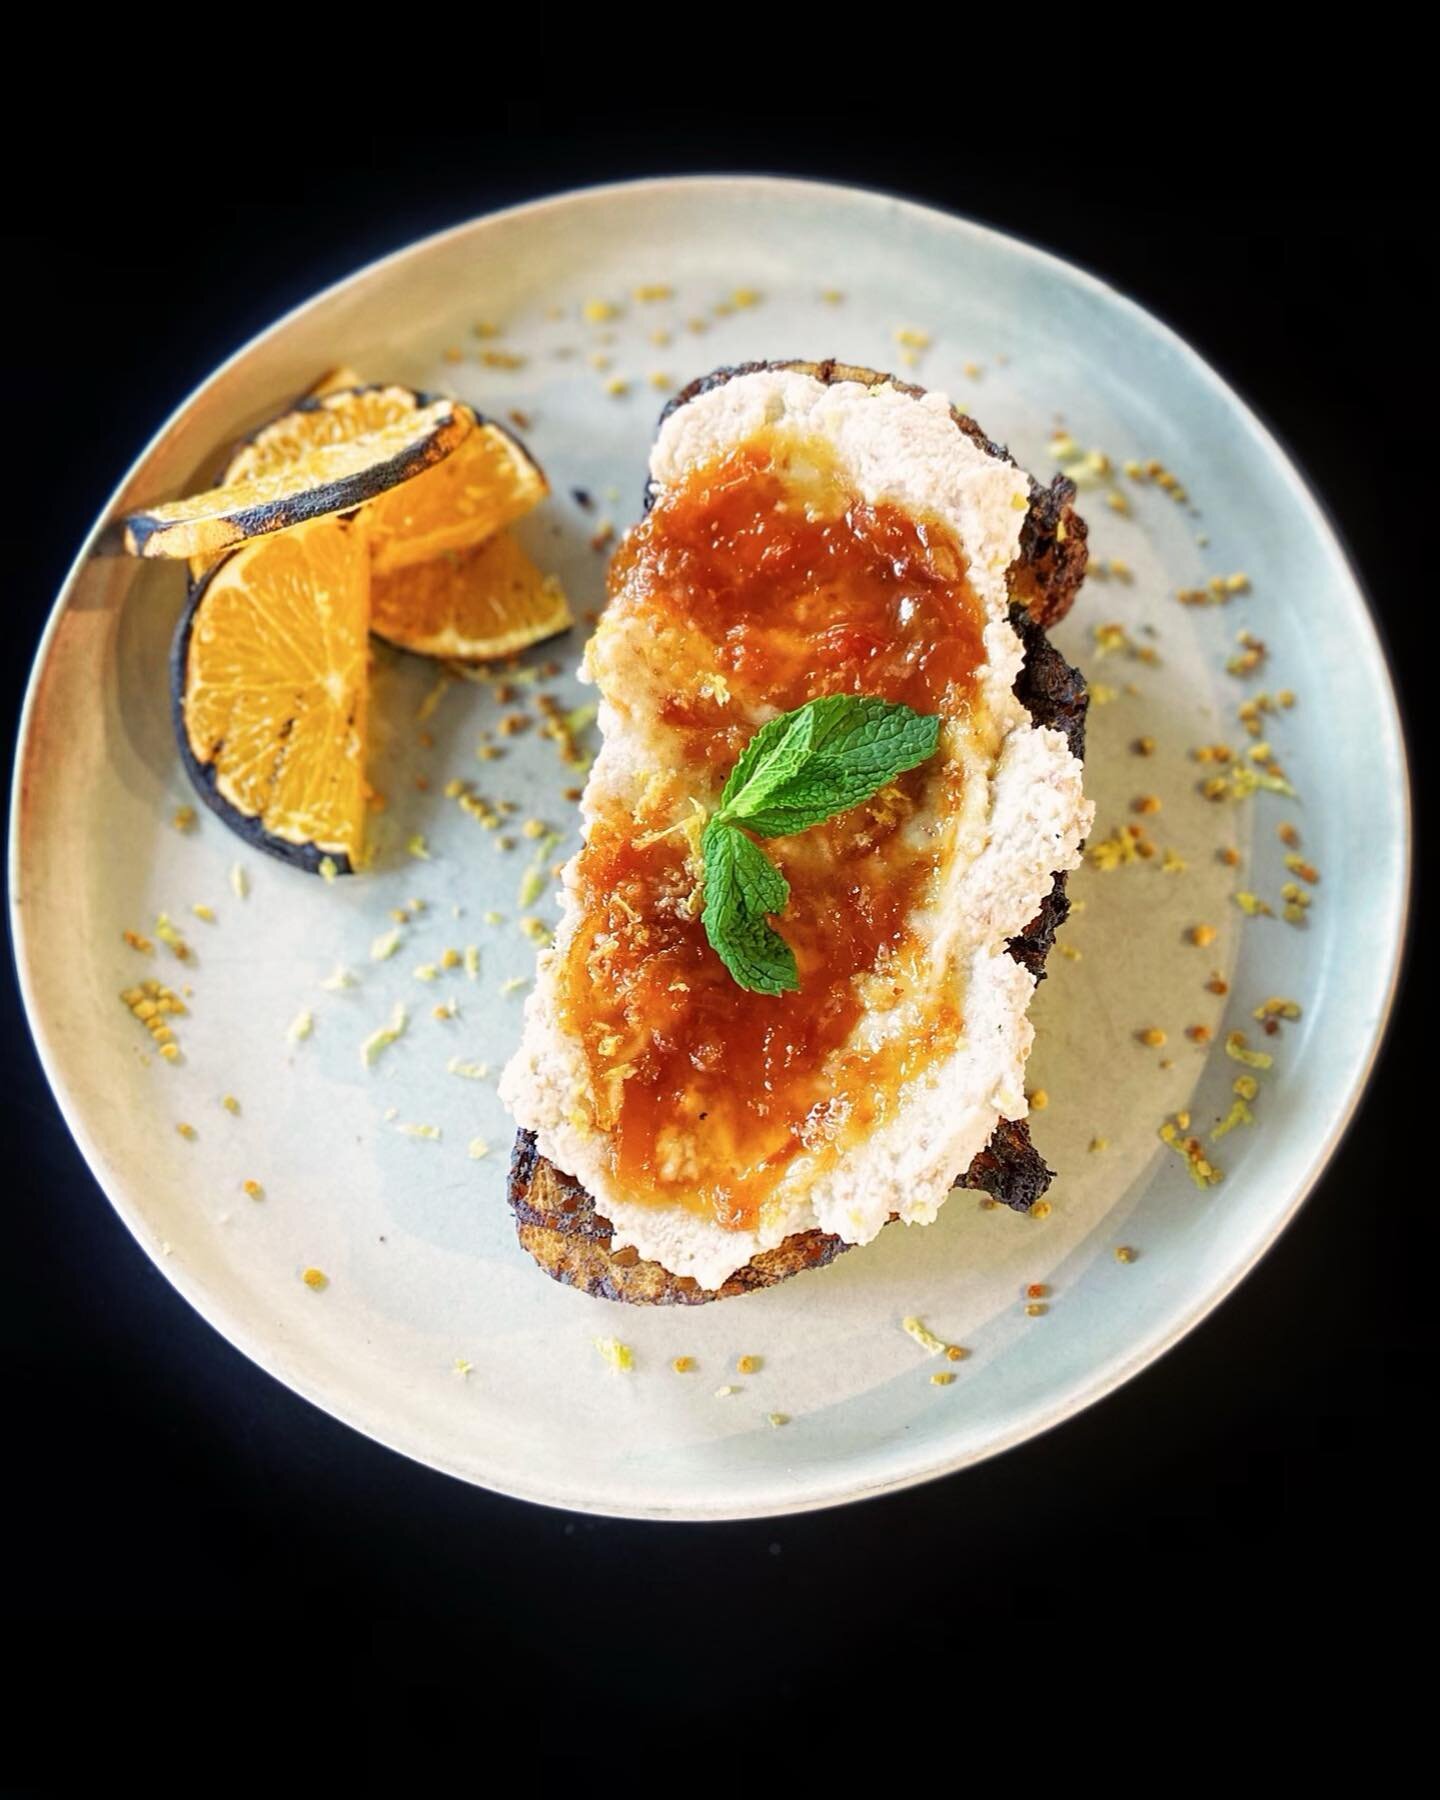 &bull; &bull; &bull; coming soon to  n e s t &bull; &bull; &bull;

Almond Ricotta Tartine with Seasonal Preserves // Citrus Marmalade 🍊💫 @reunionbread 

Just a little taste of what&rsquo;s to come on our spring menu. ✨ We look forward to sharing it